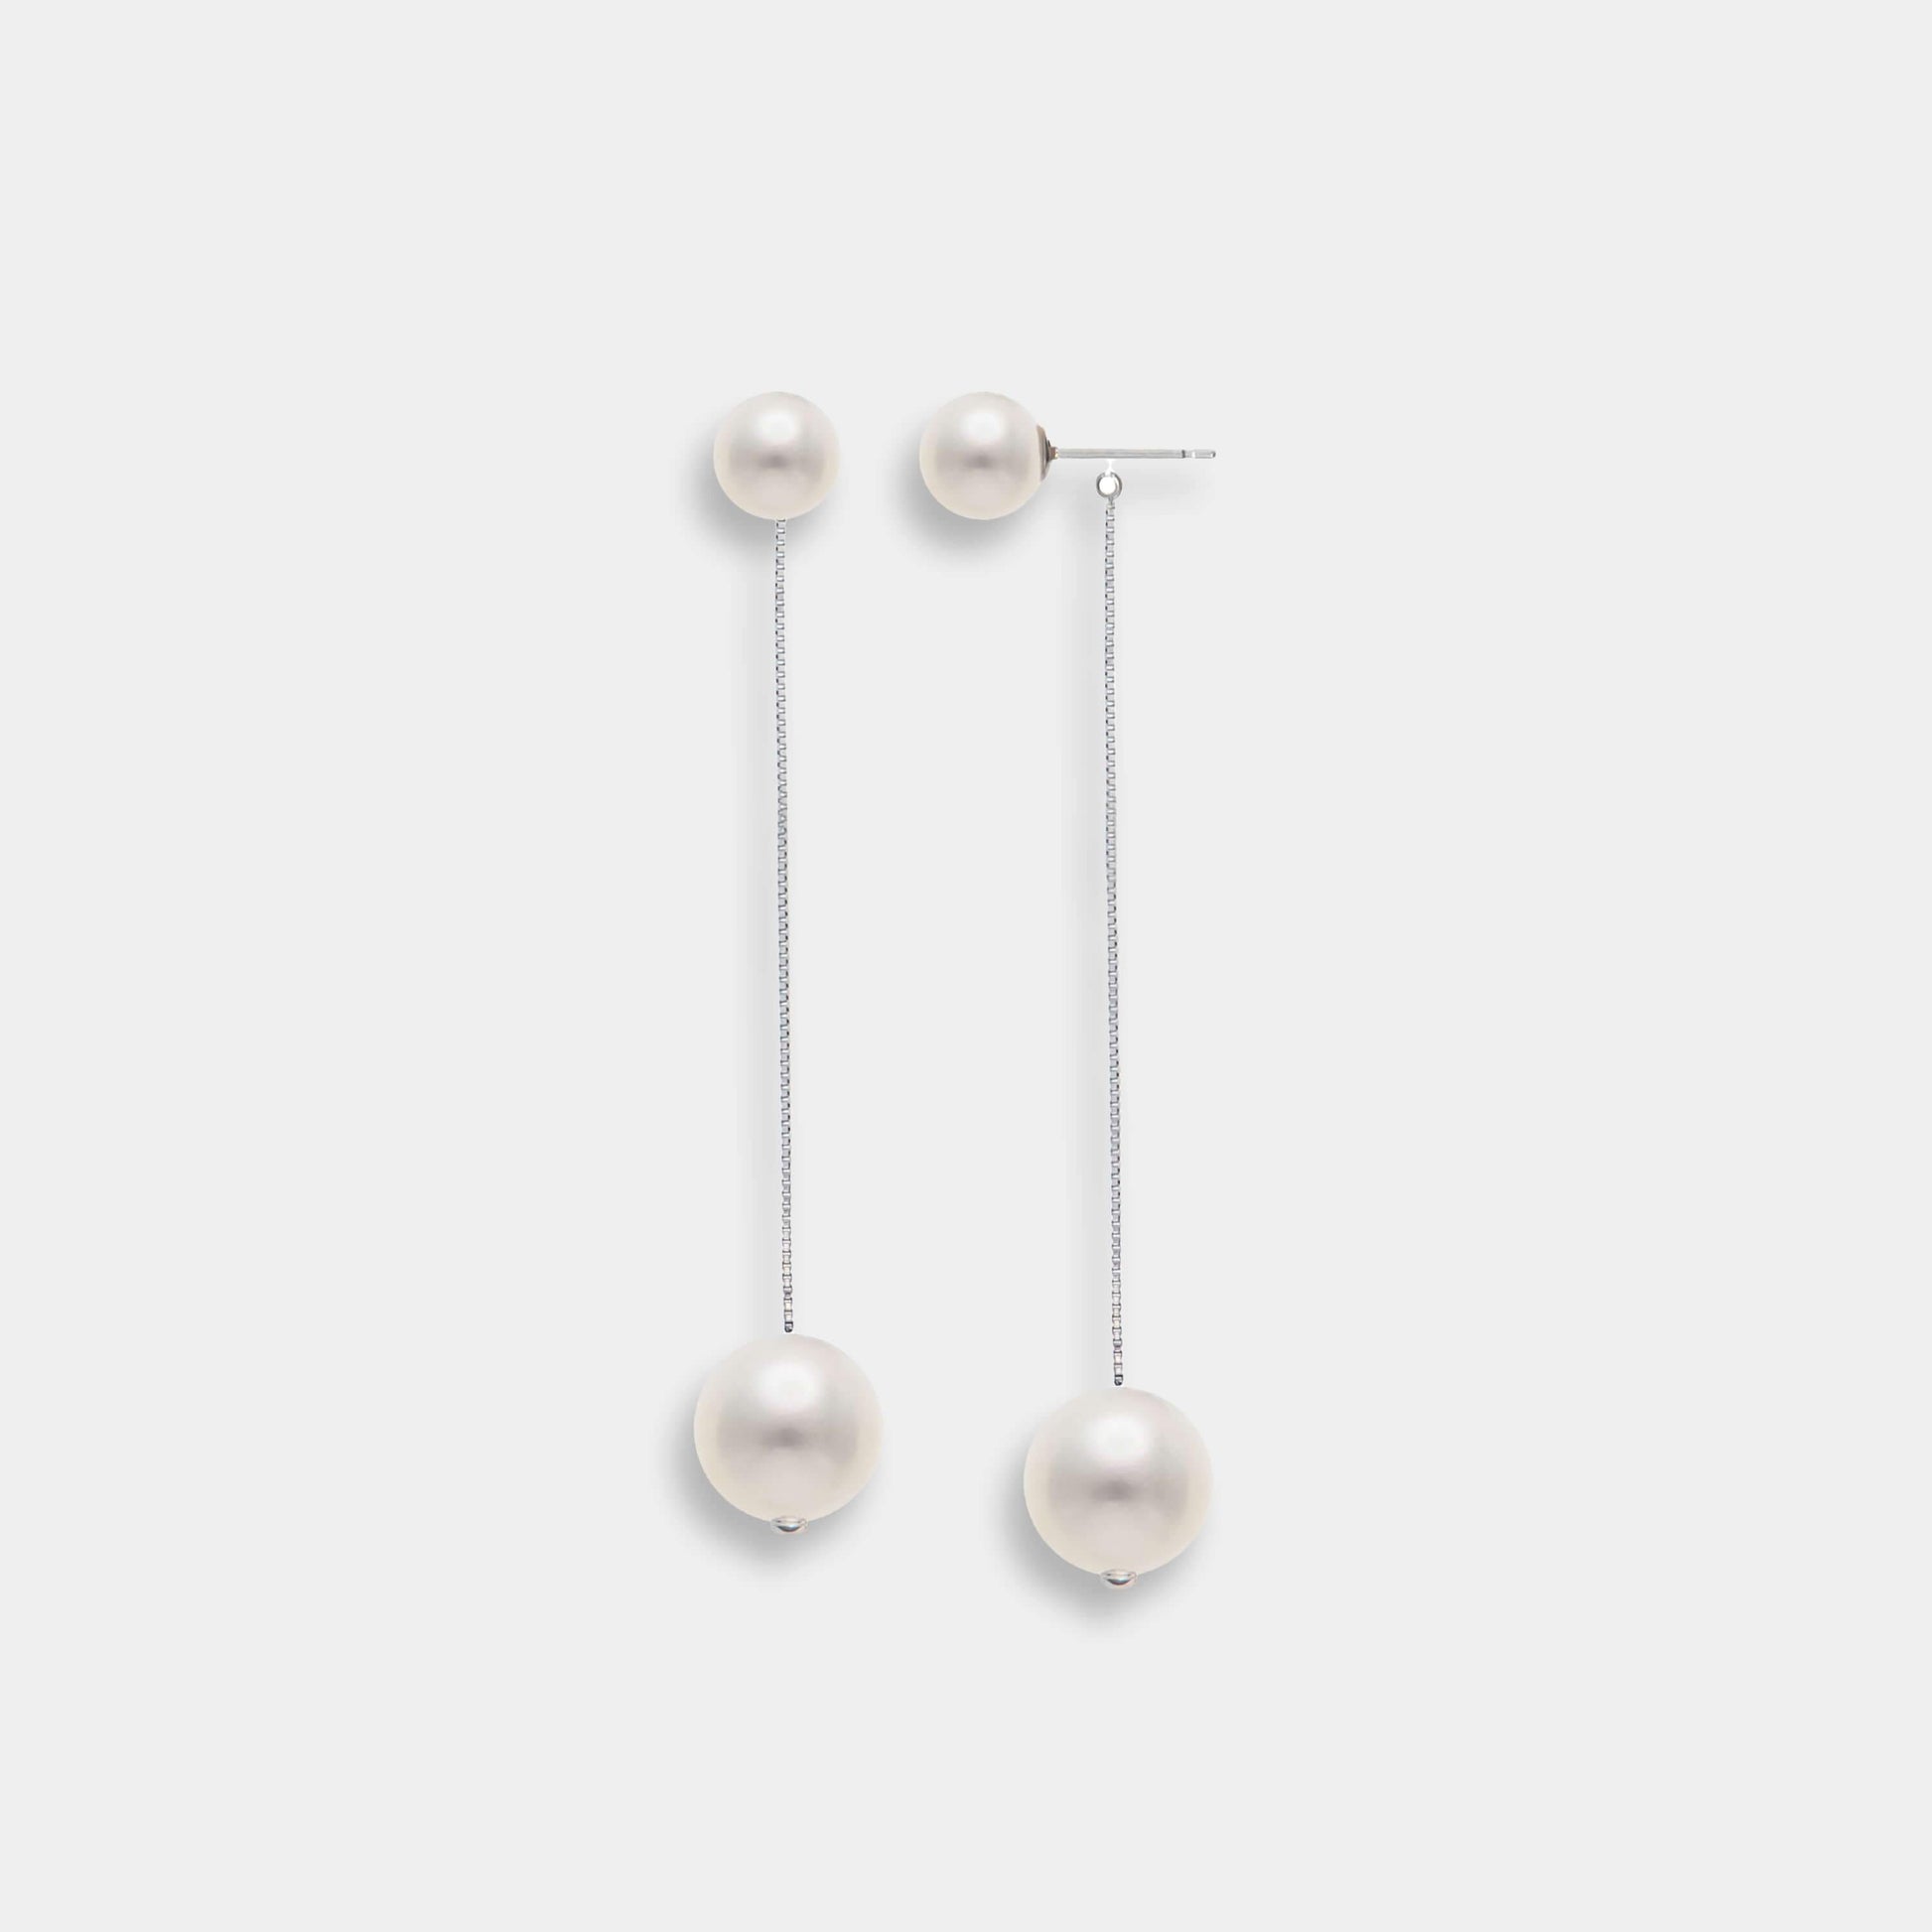 Elegant white gold pearl drop earrings, perfect for any occasion. Sway Pearl Piercing adds a touch of sophistication to your look.